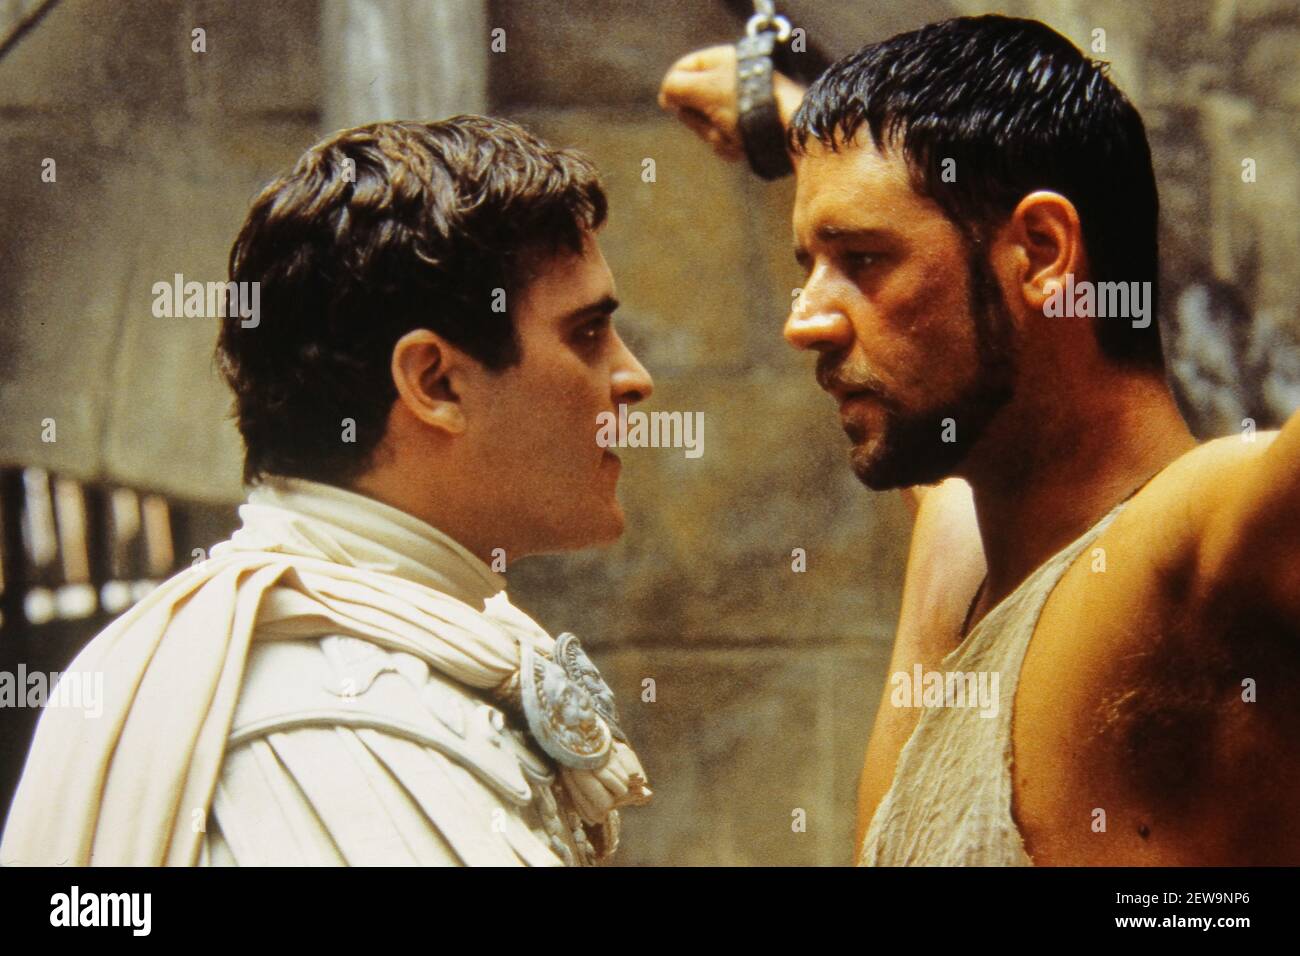 Joaquin Phoenix, Russell Crowe, 'Gladiator' (2000) DreamWorks Pictures . Photo Credit: Jaap Buitendijk/DreamWorks Pictures /The Hollywood Archive -  File Reference # 34082-692THA Stock Photo